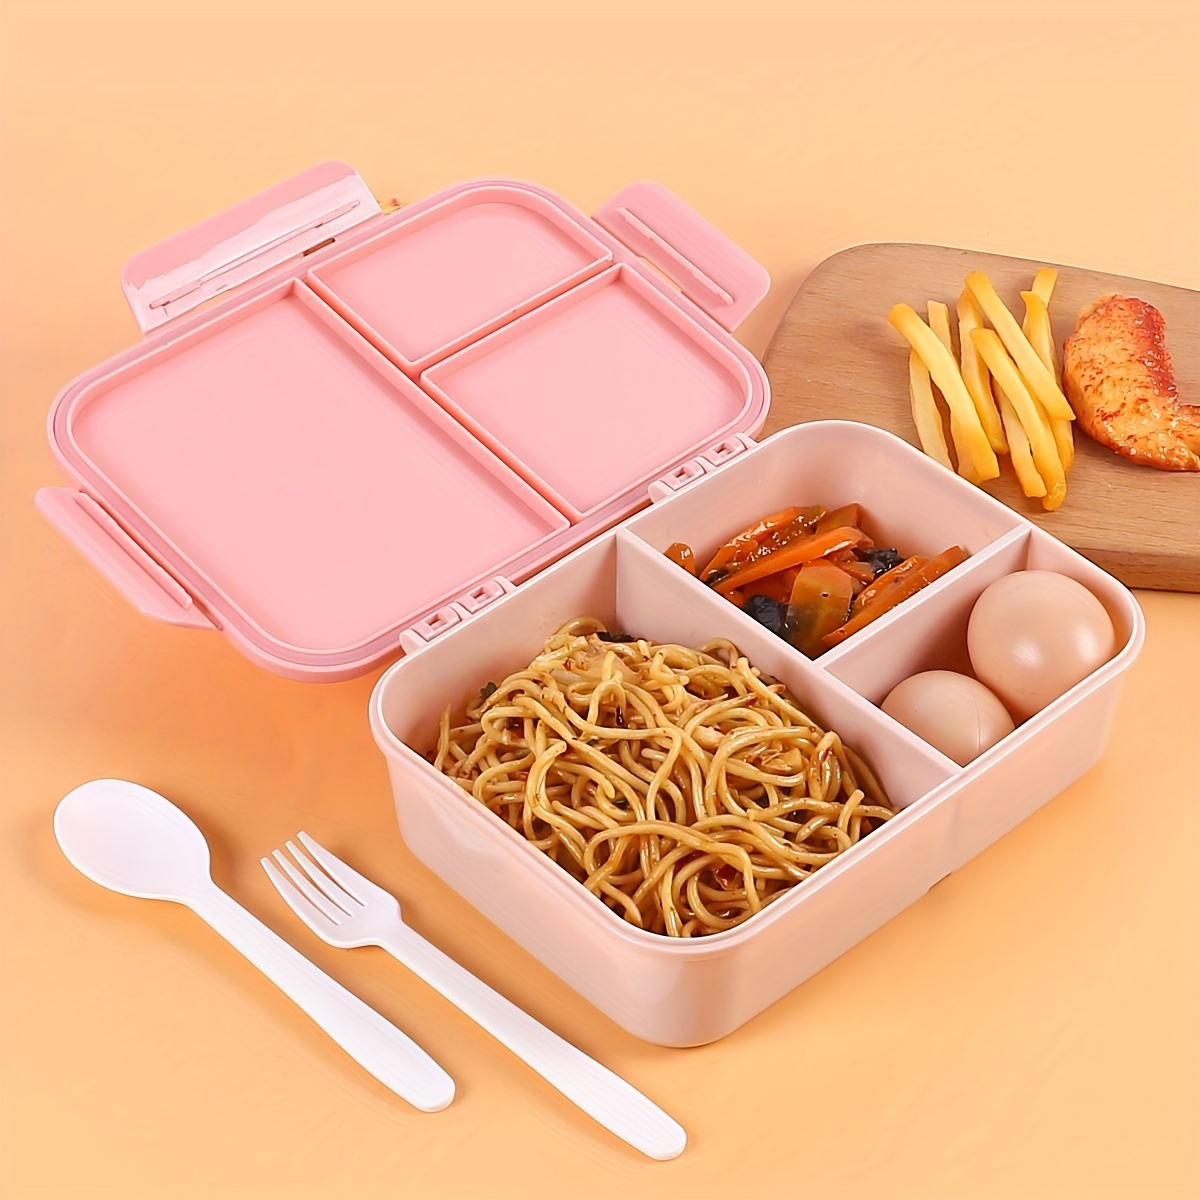 Adult Lunch Box Bento Box Adult Lunch Box With 3 Compartments